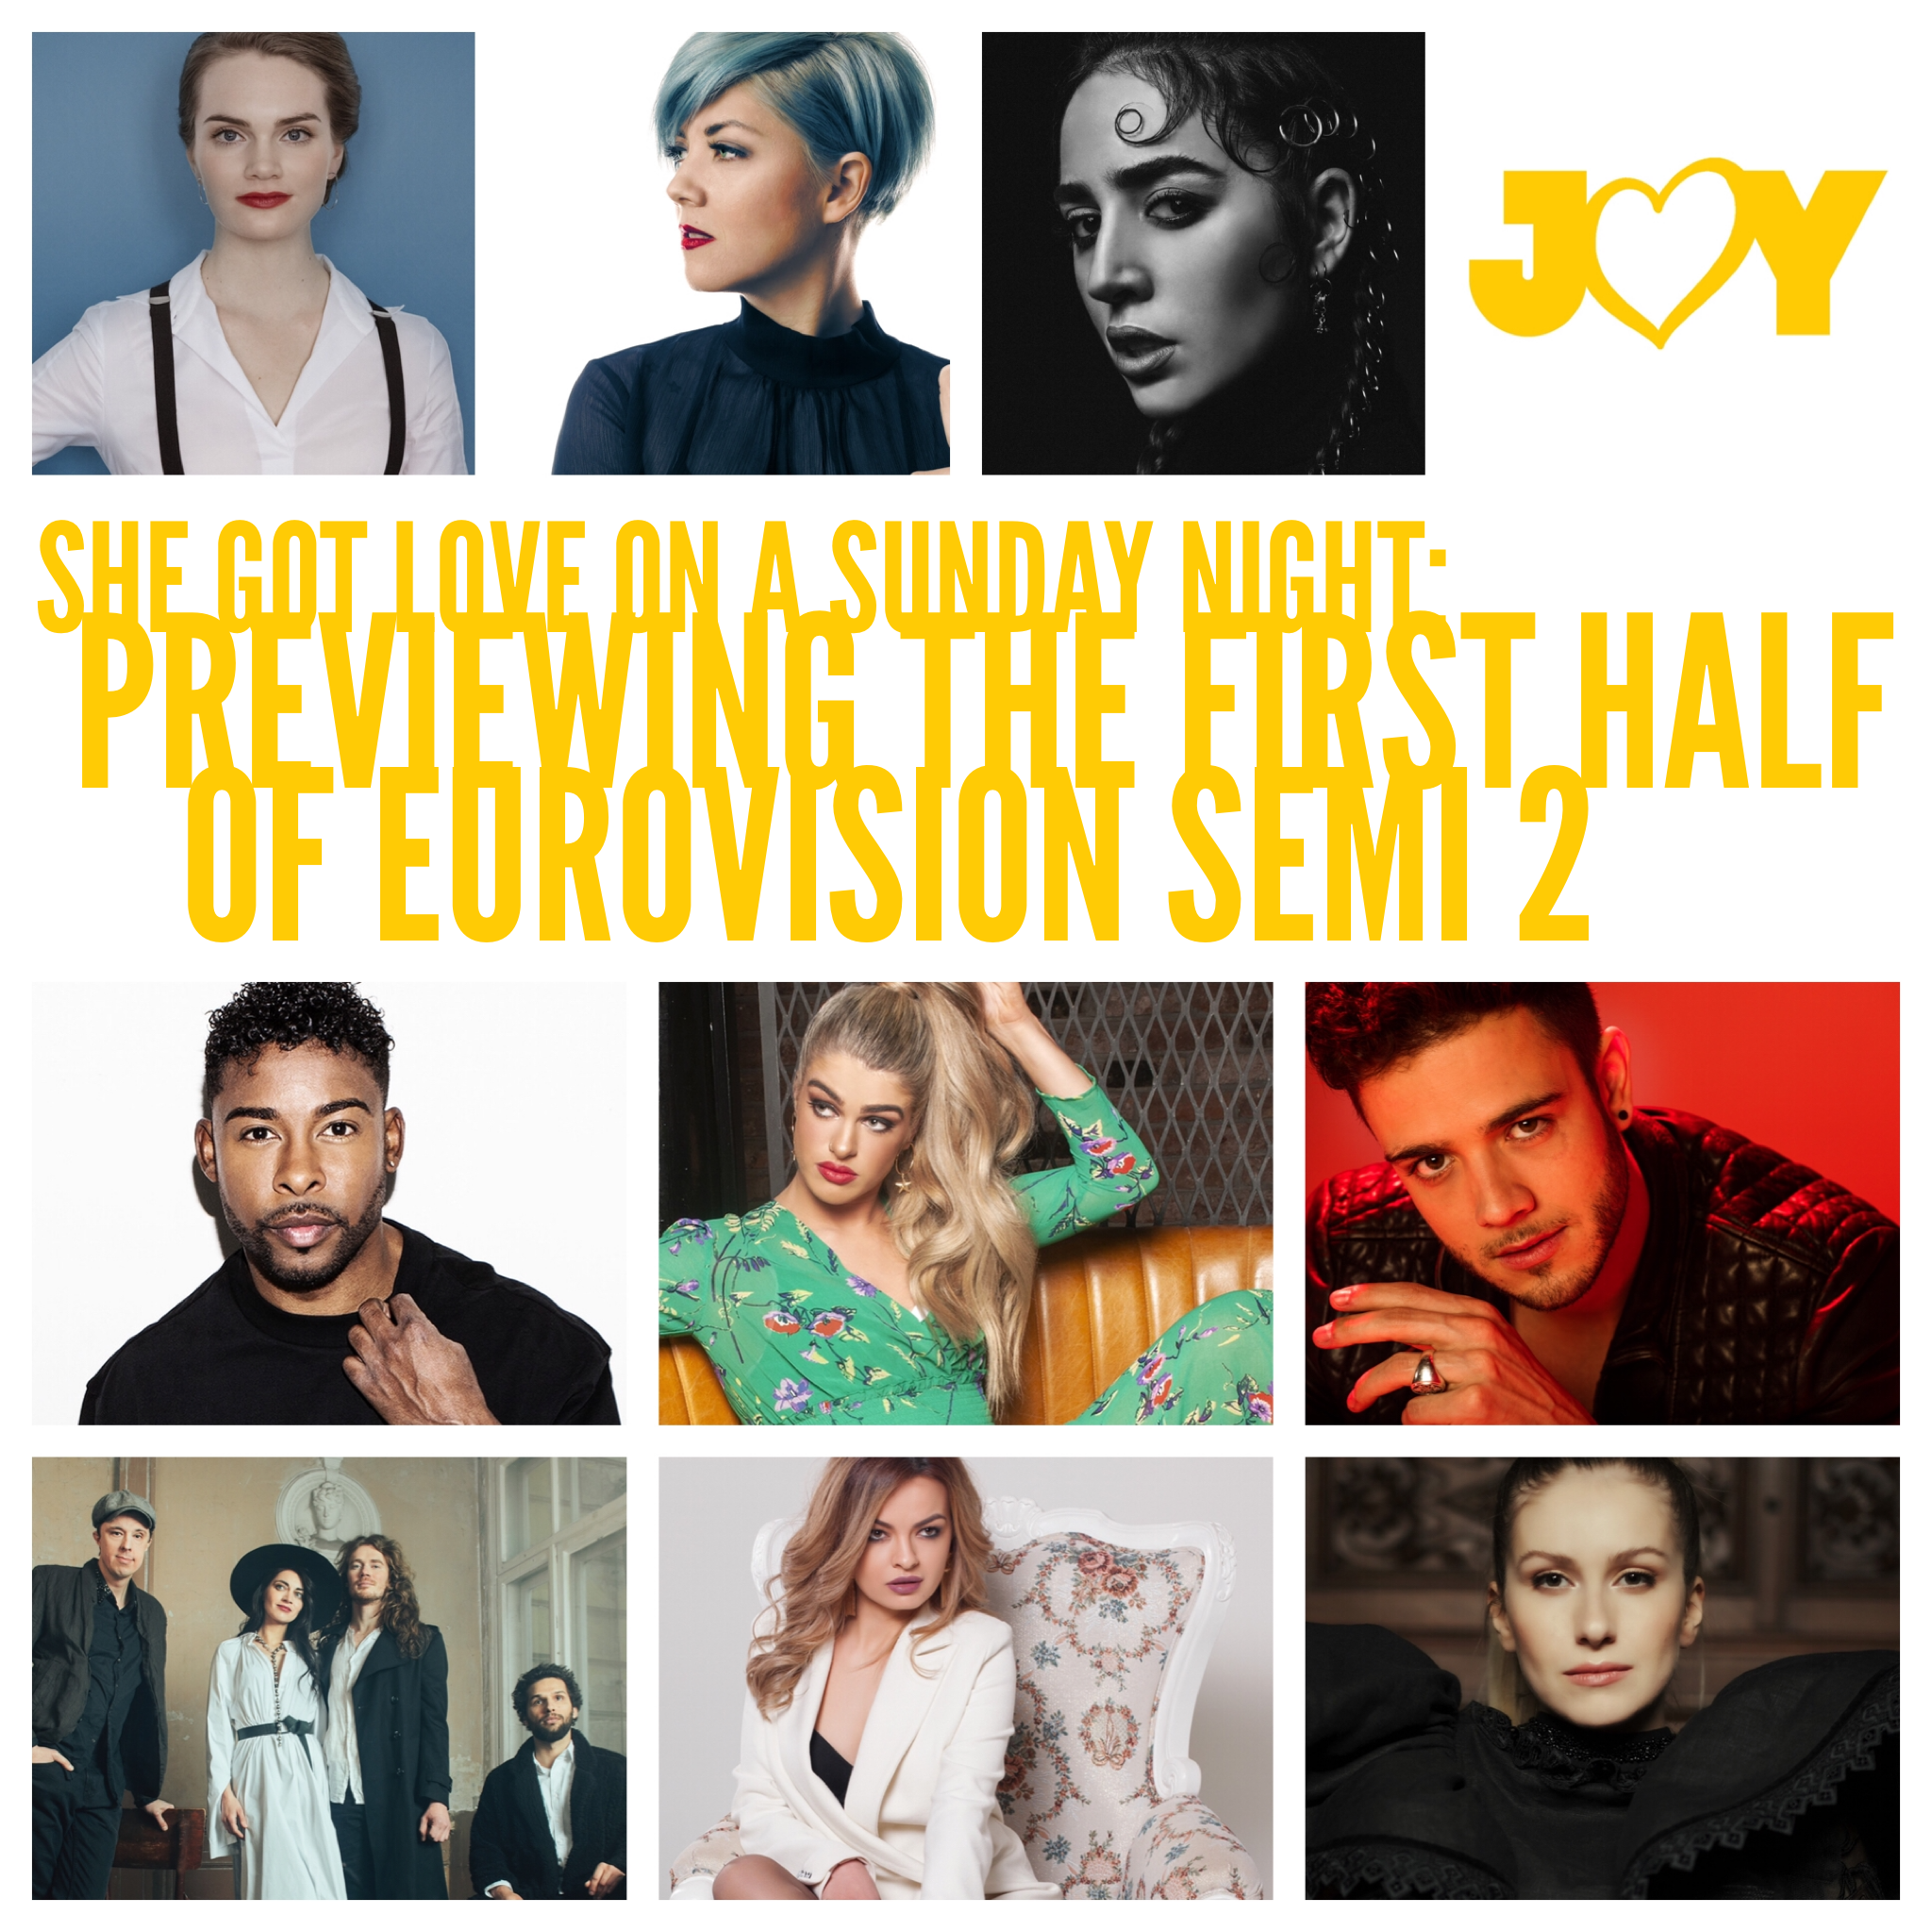 Eurovision 2019: Previewing the first half of Semi Final 2